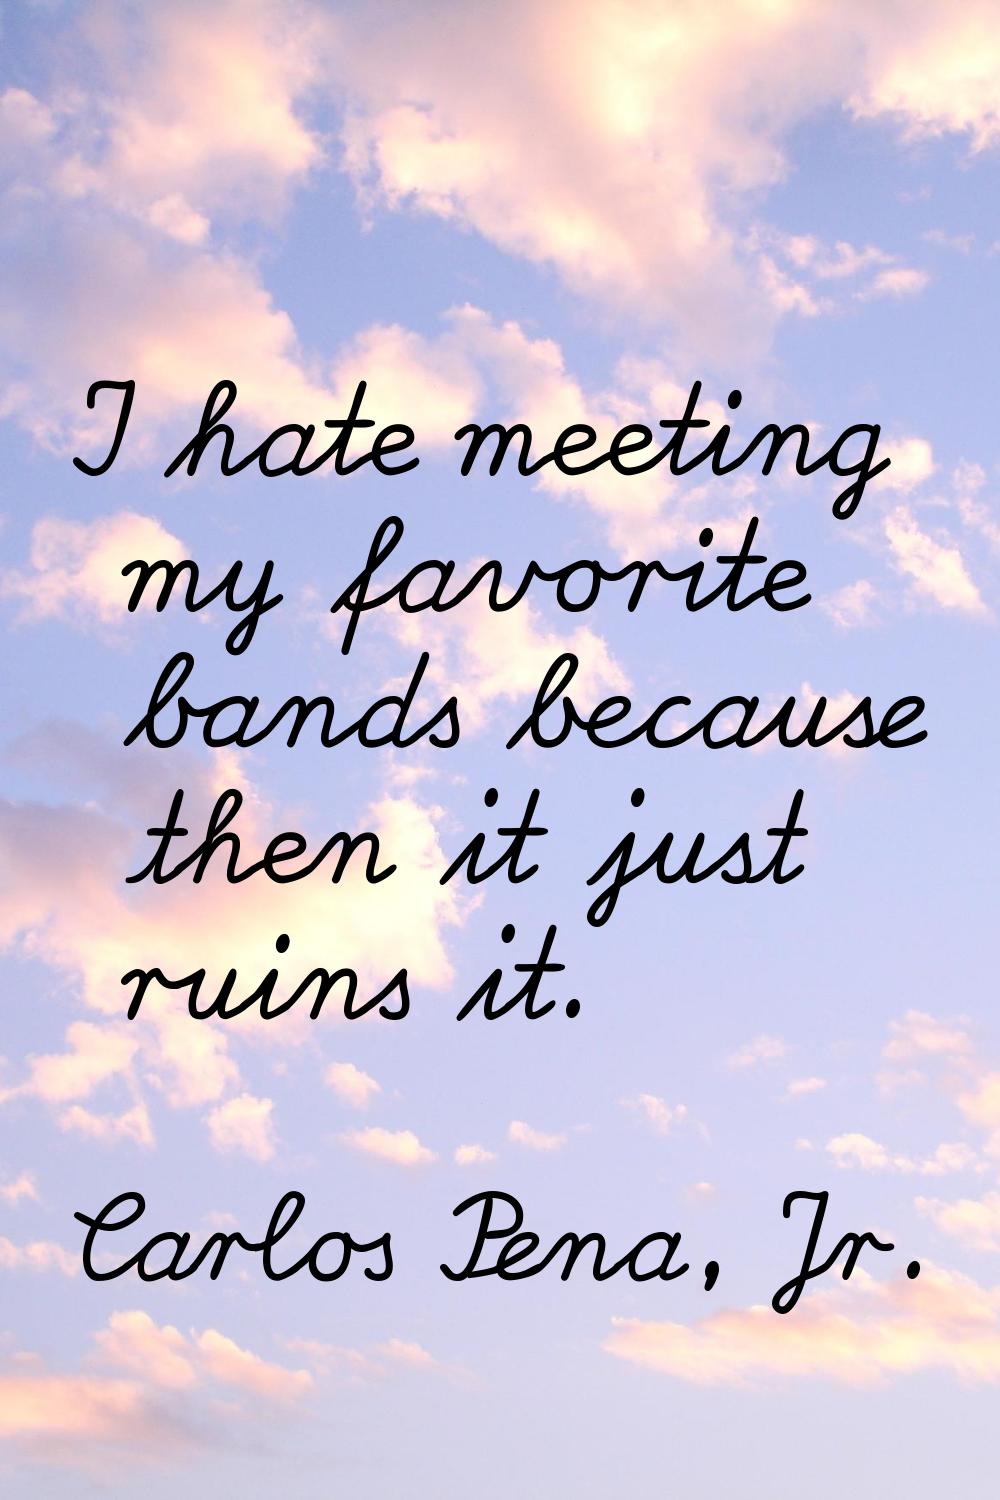 I hate meeting my favorite bands because then it just ruins it.